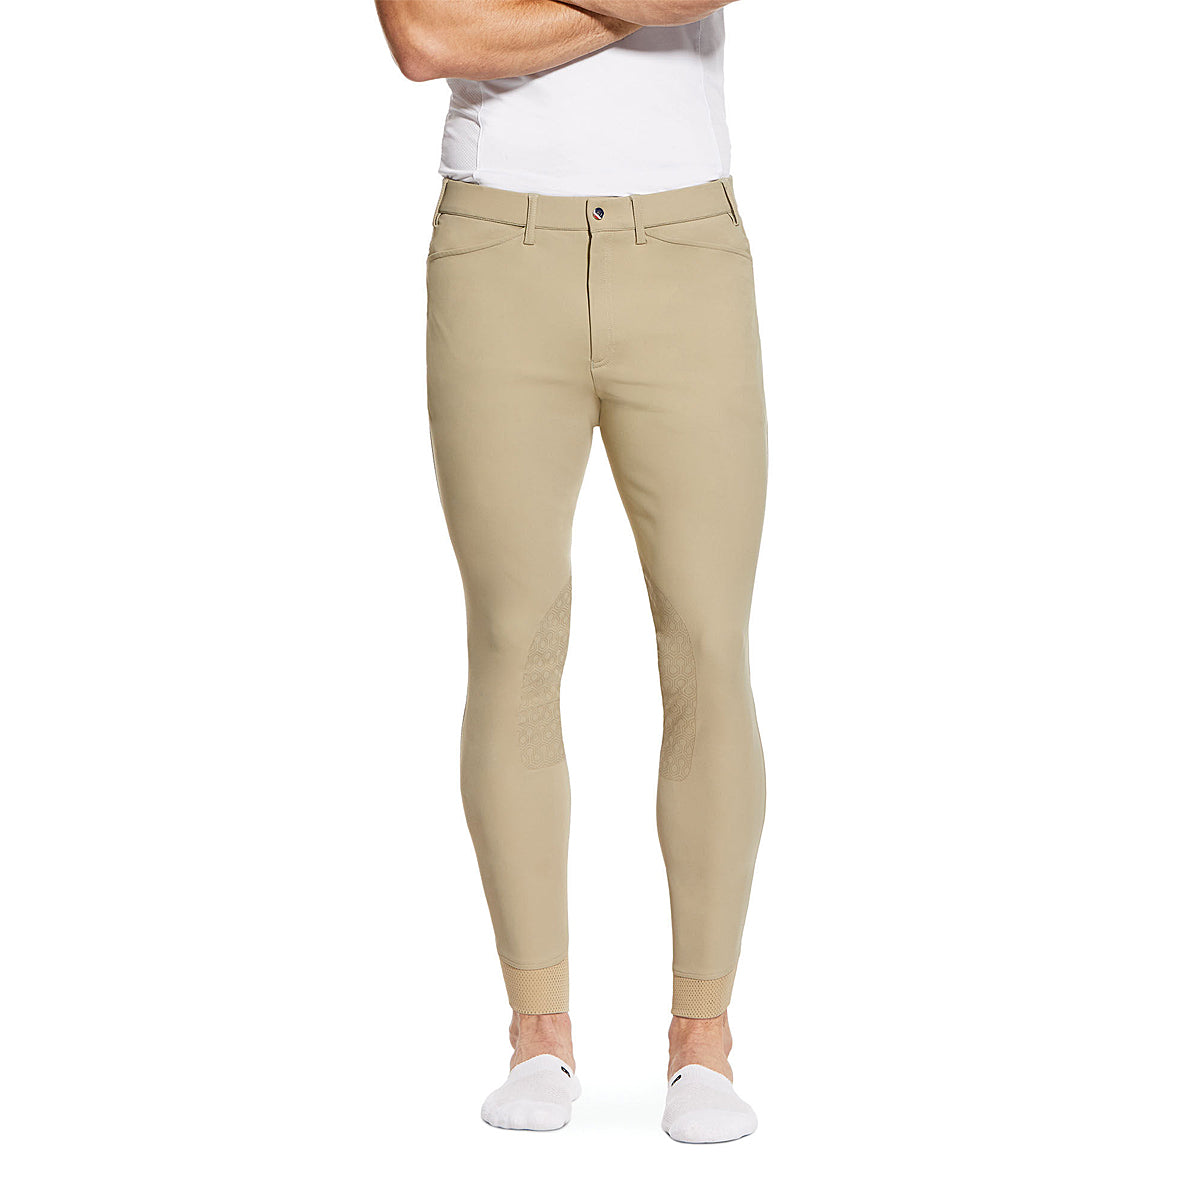 Riding Pants | Buy Riding Pants Online at Best Price from Riders Junction